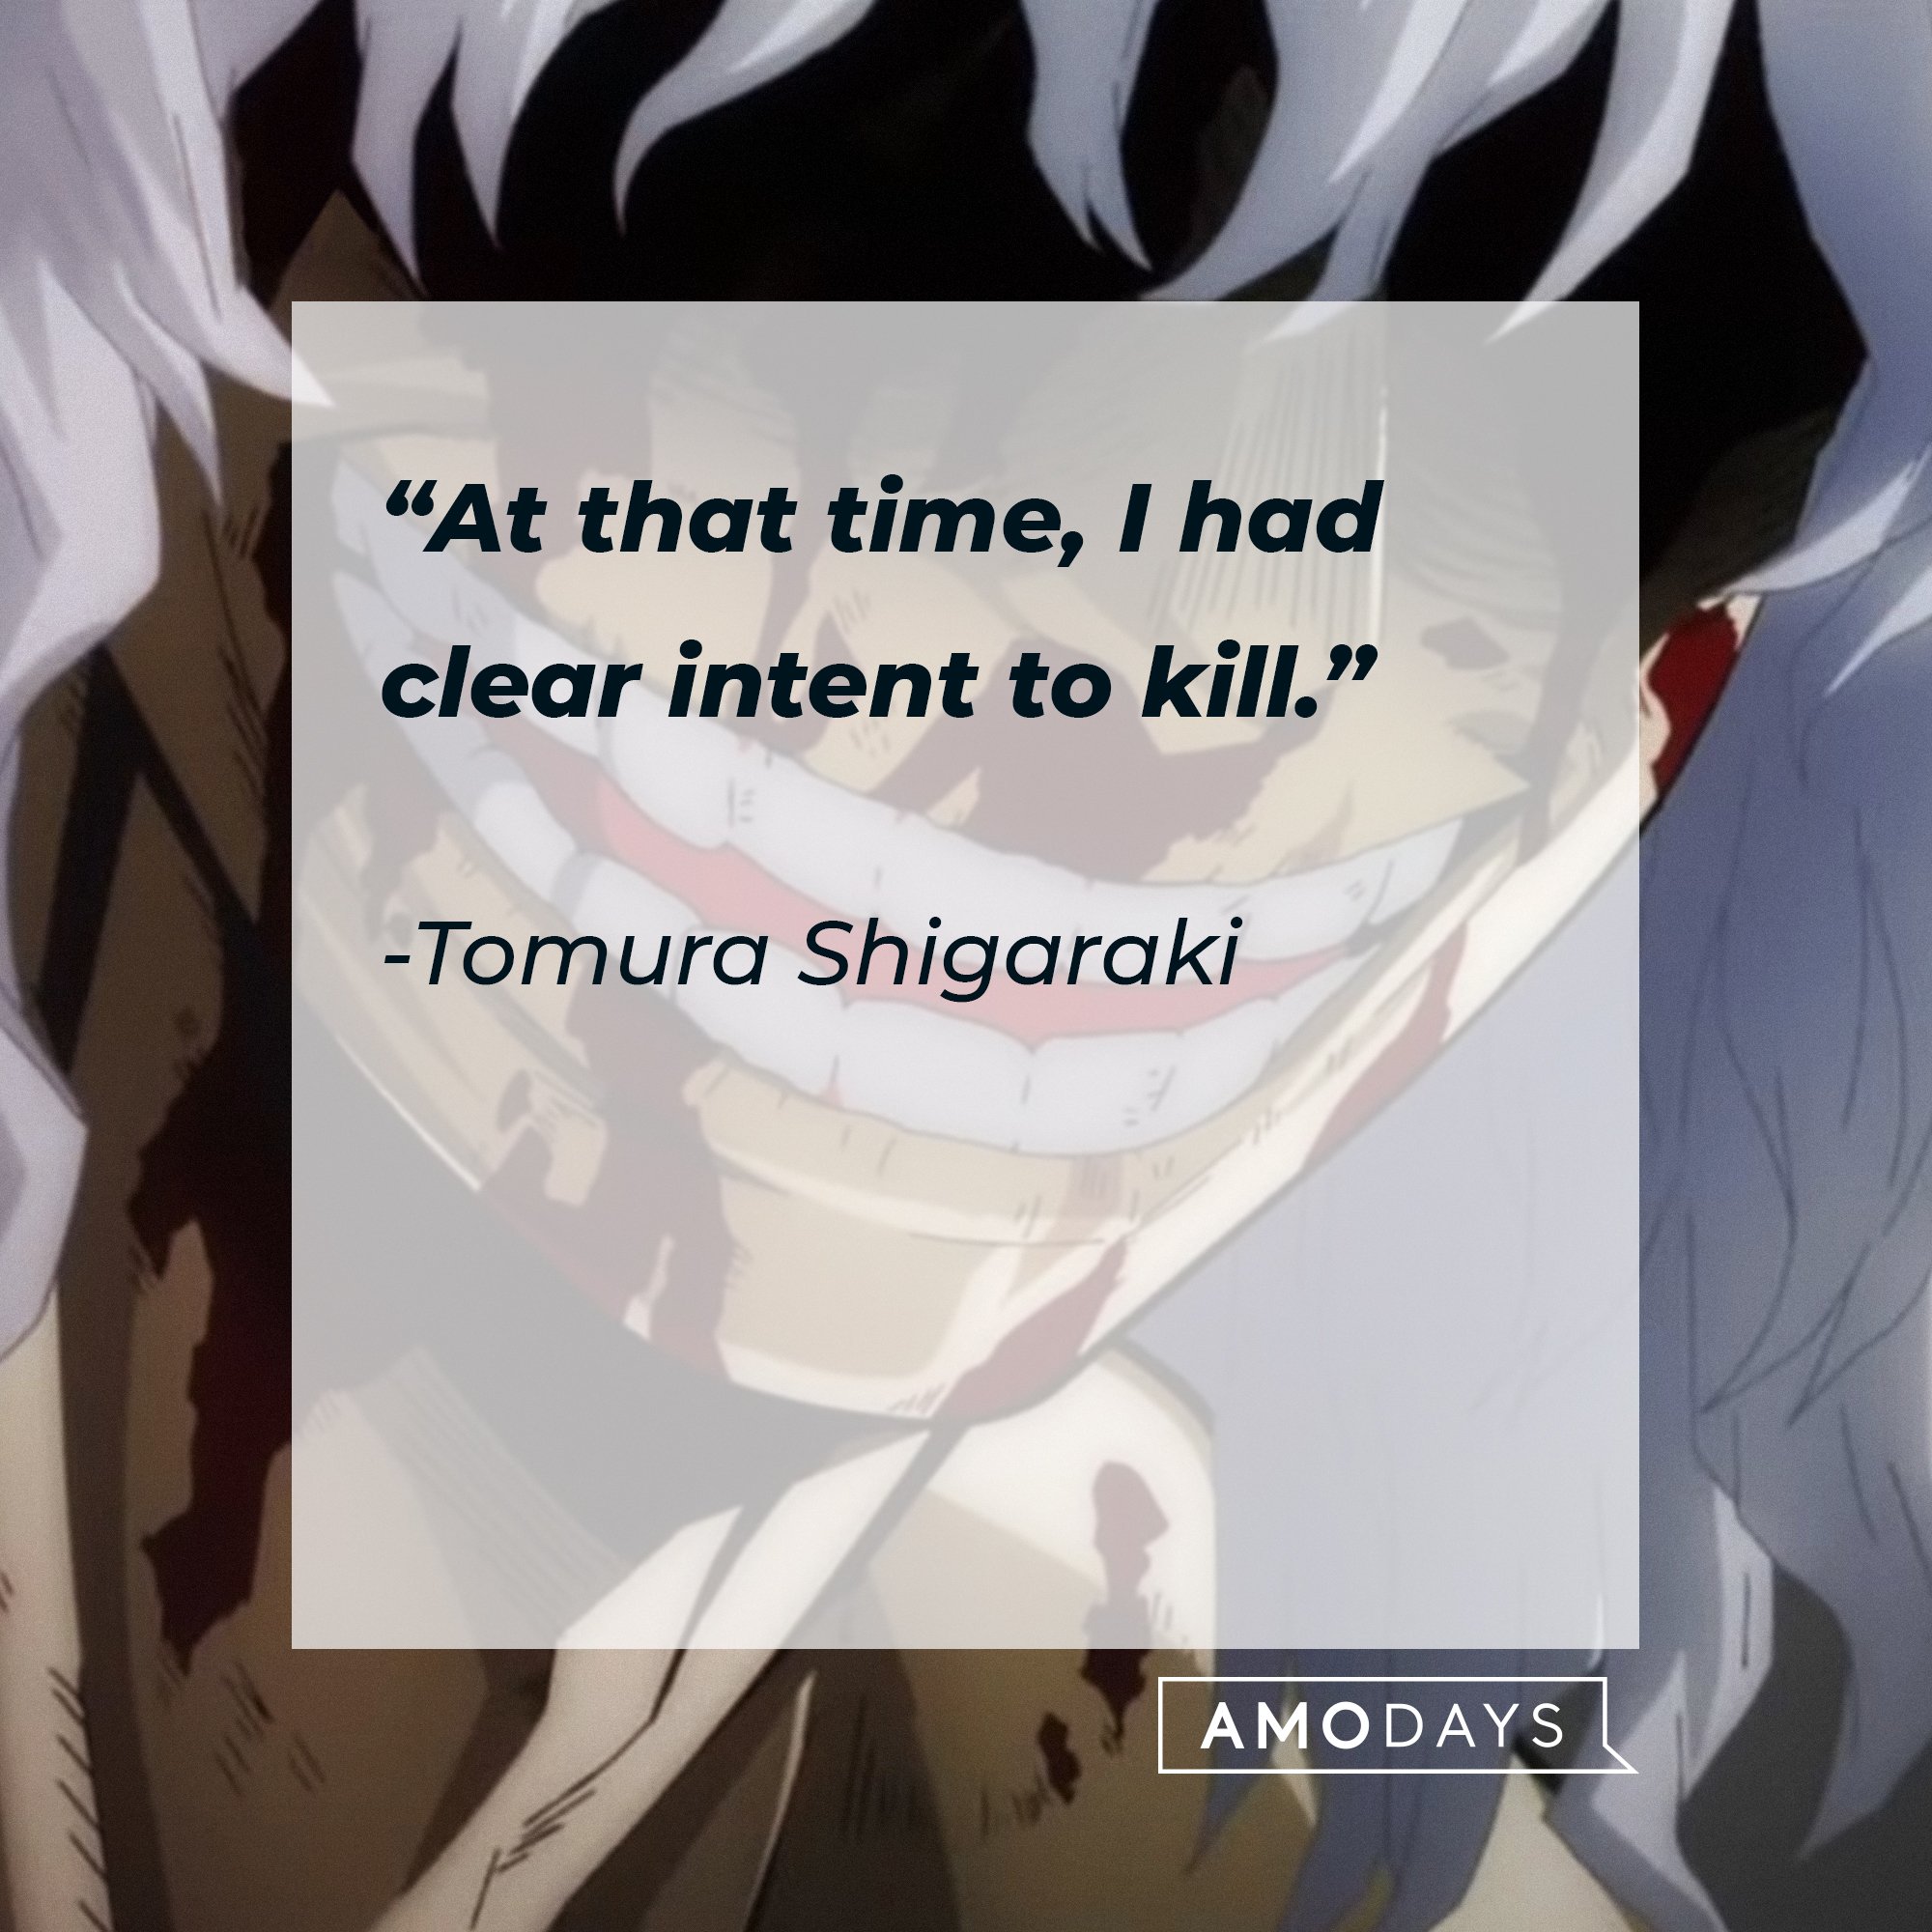 Tomura Shigaraki’s quote: “At that time, I had clear intent to kill.” | Image: AmoDays